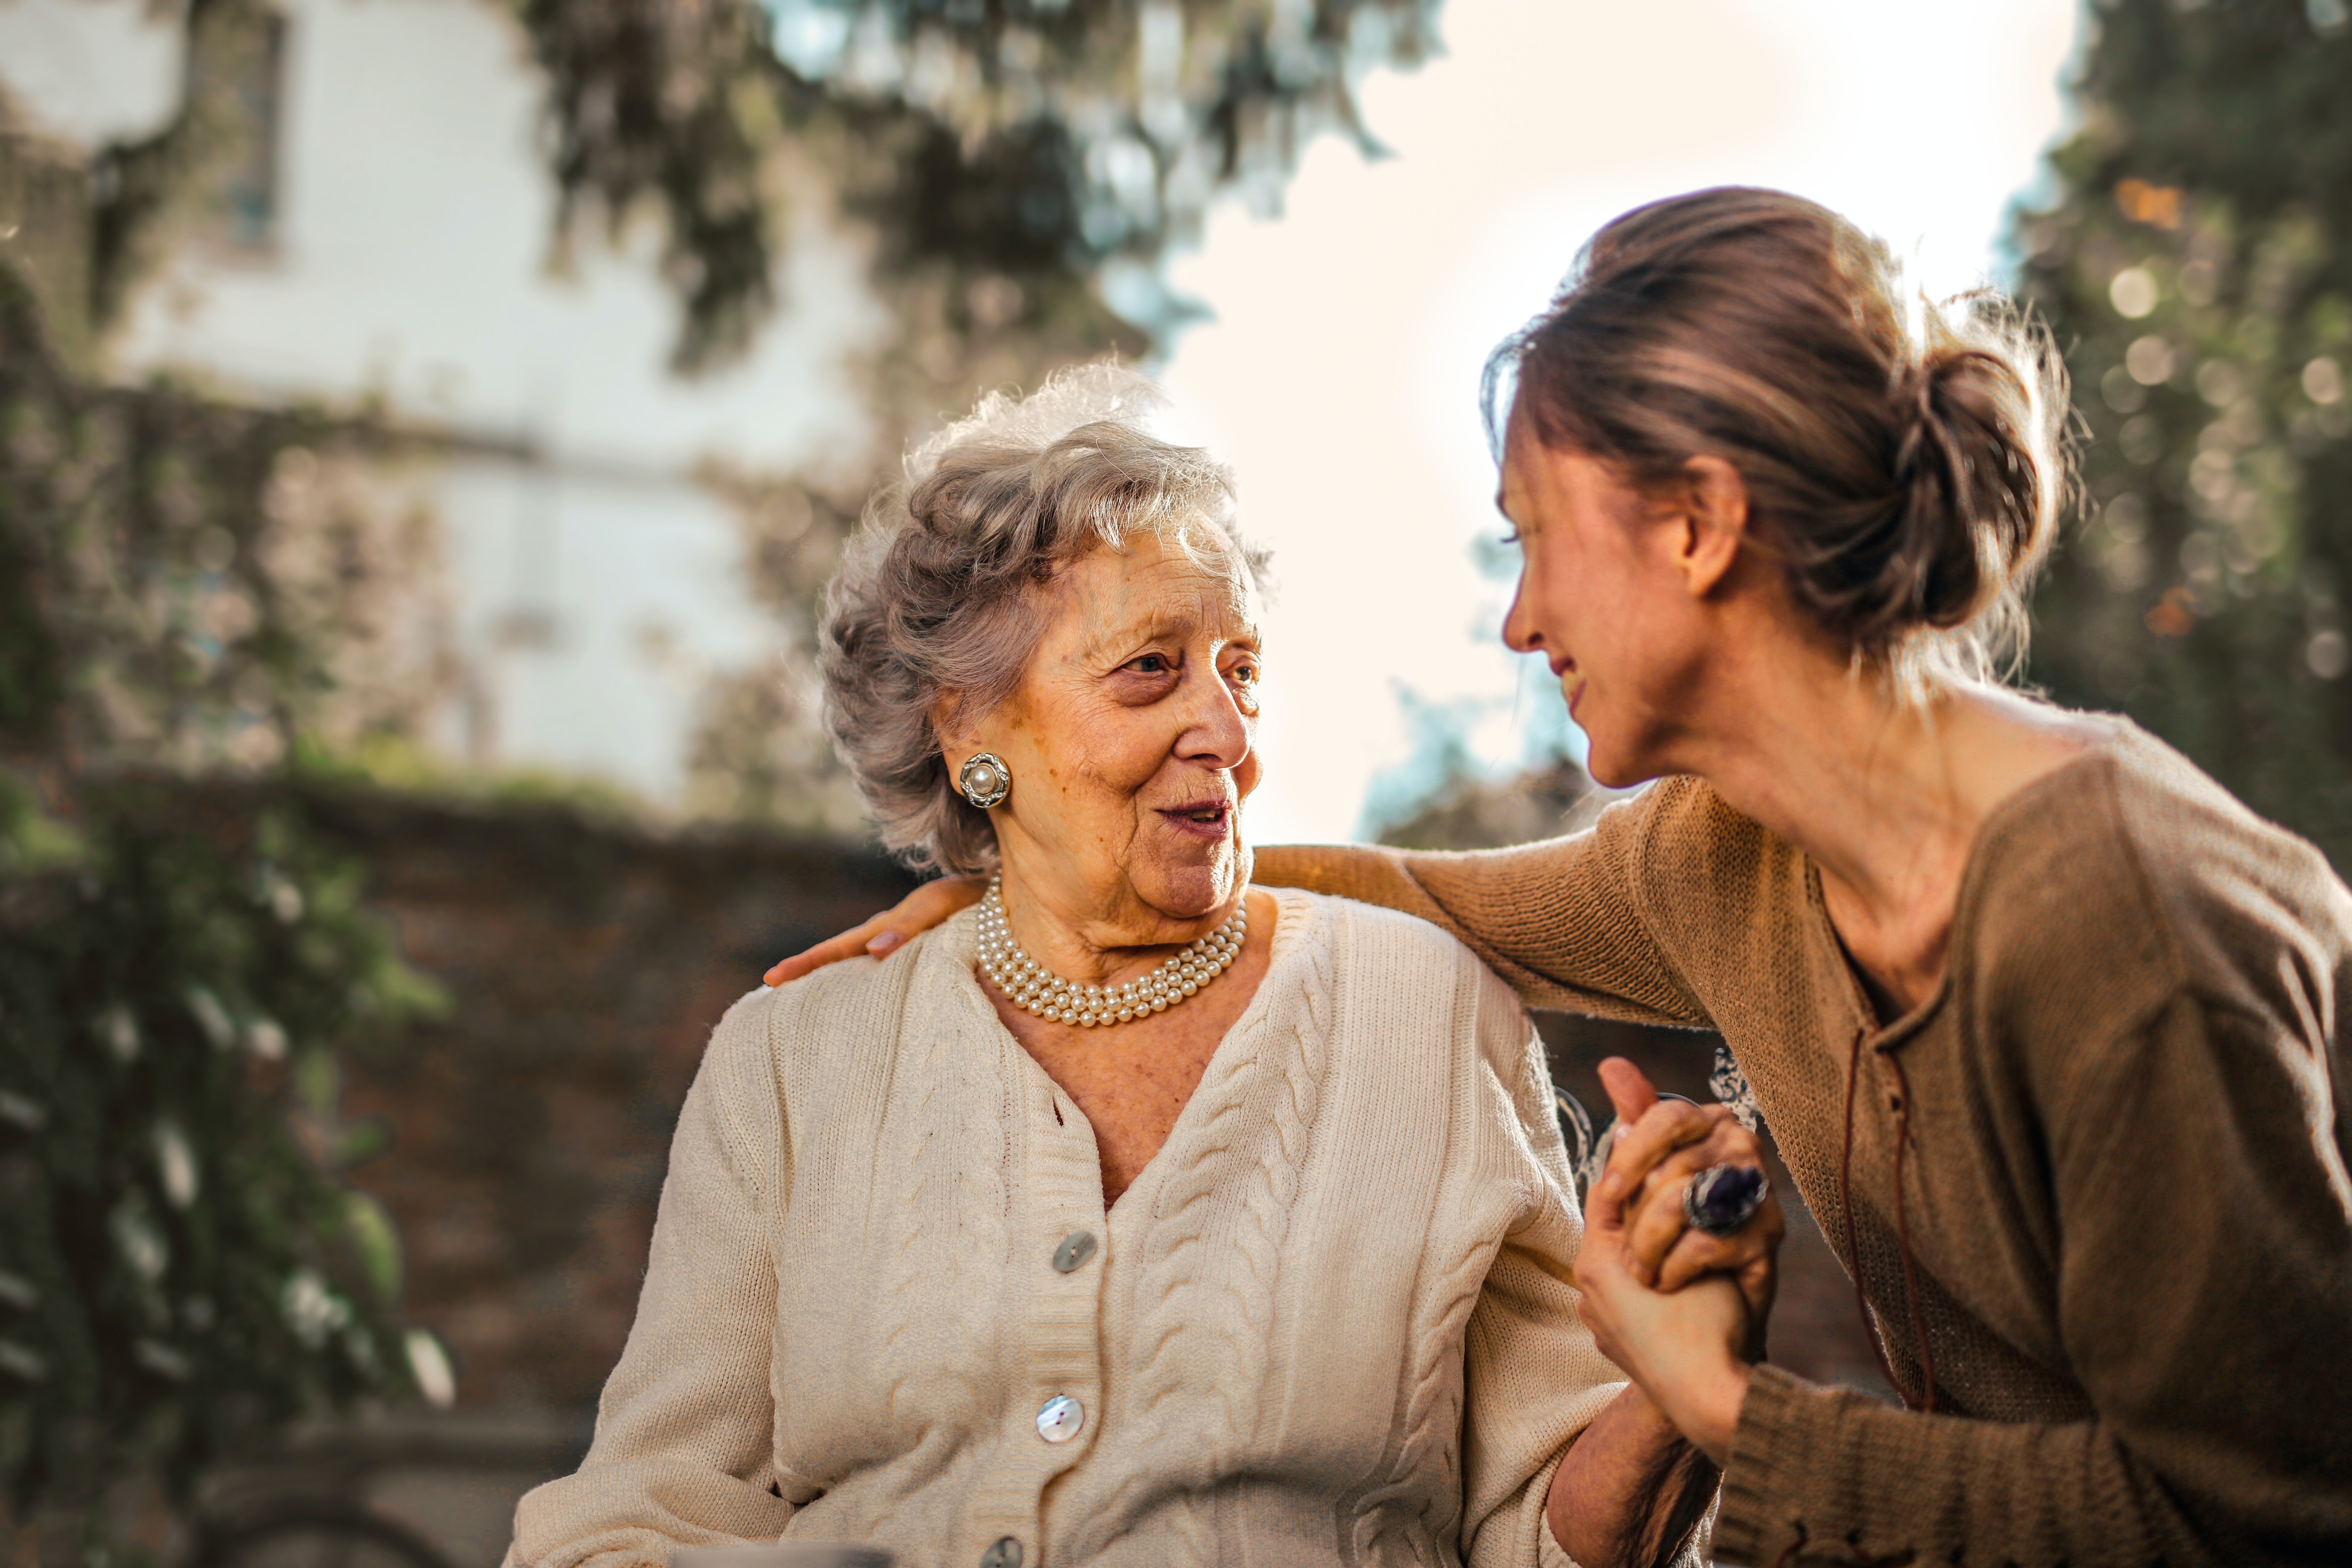 Ann spent as much of her free time as was possible with her granny | Source: Pexels